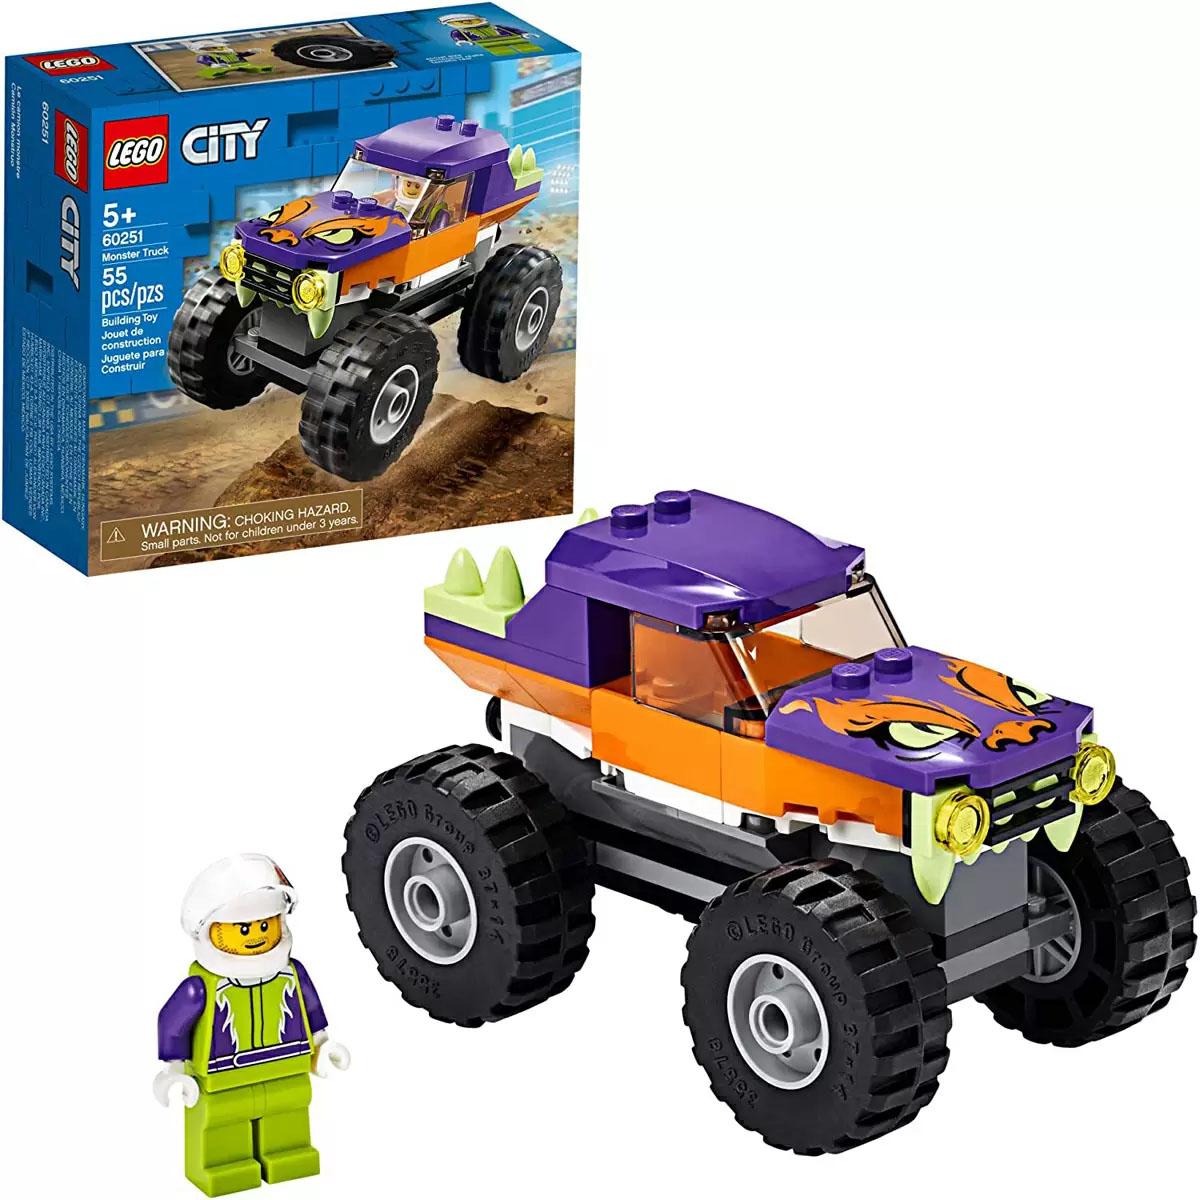 Lego City Monster Truck 60251 Playset Building Sets for Kids for $7.19